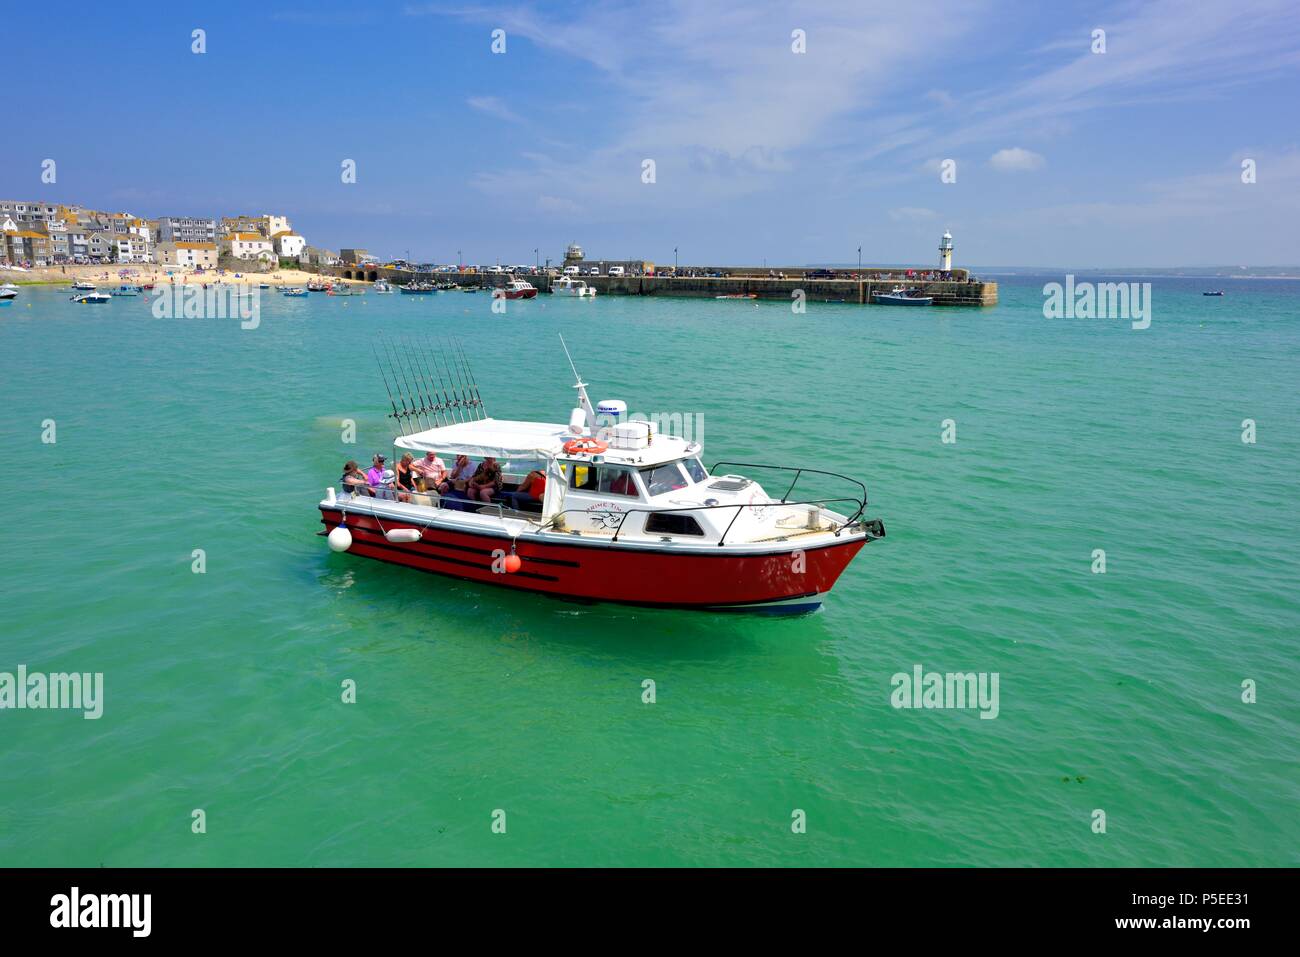 Leisure boat trip in a fishing boat, St ives,Cornwall,England,UK Stock Photo